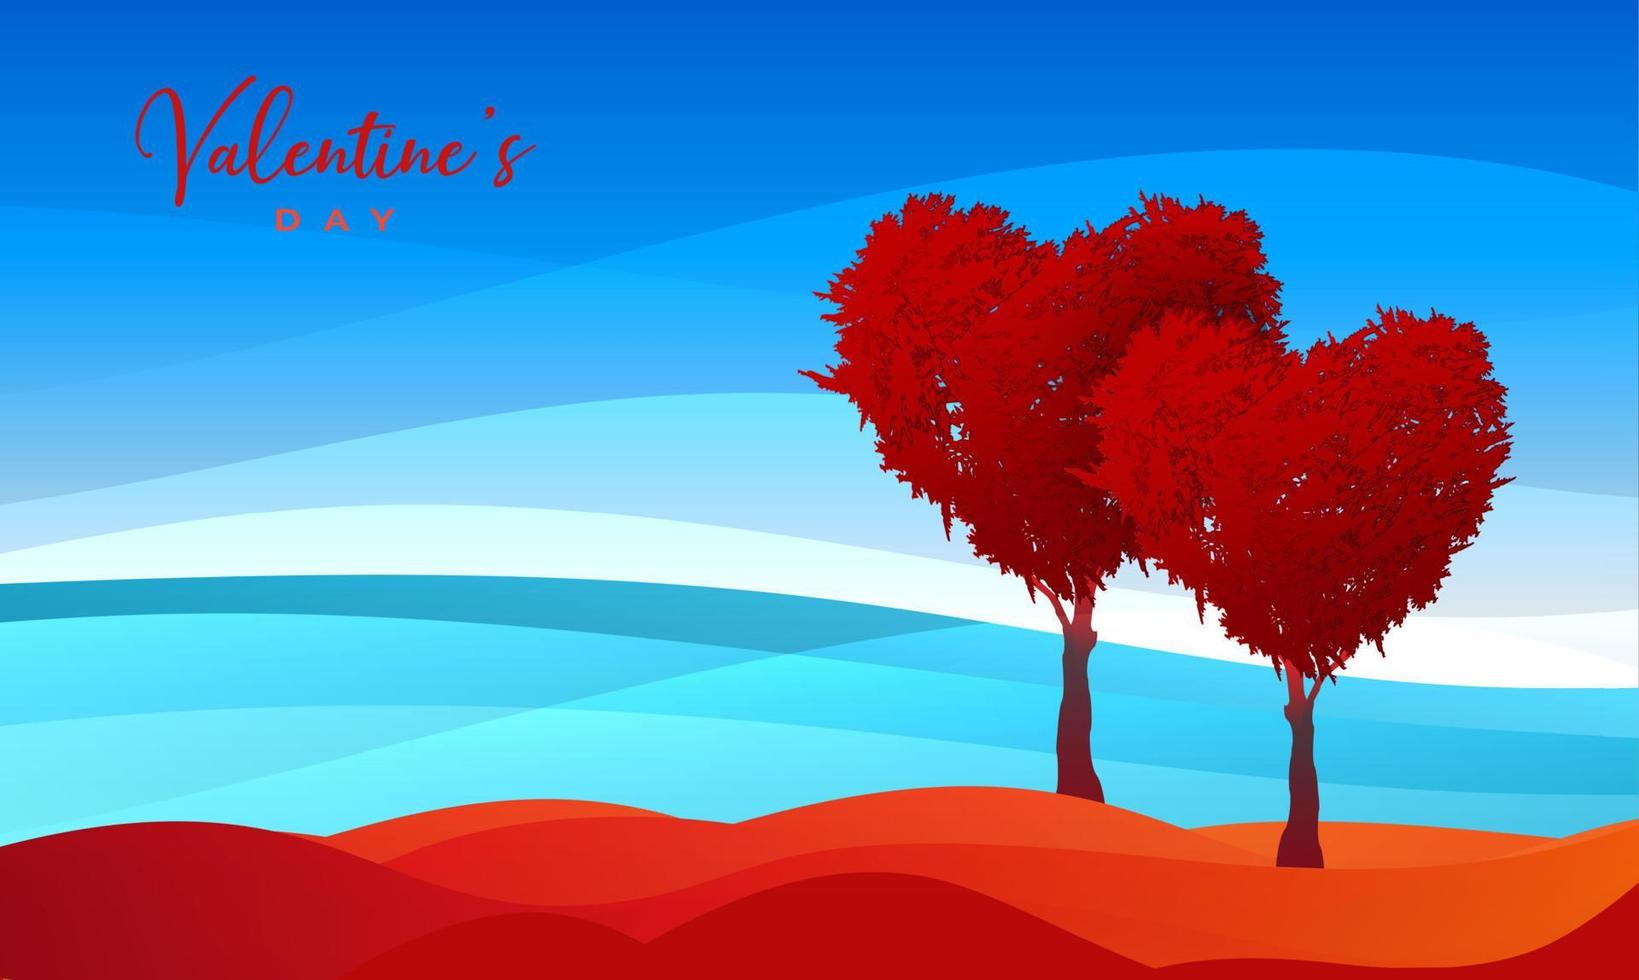 Trees in the shape of red heart, valentines day background, vector fantasy landscape, couple of trees symbol of love banner template